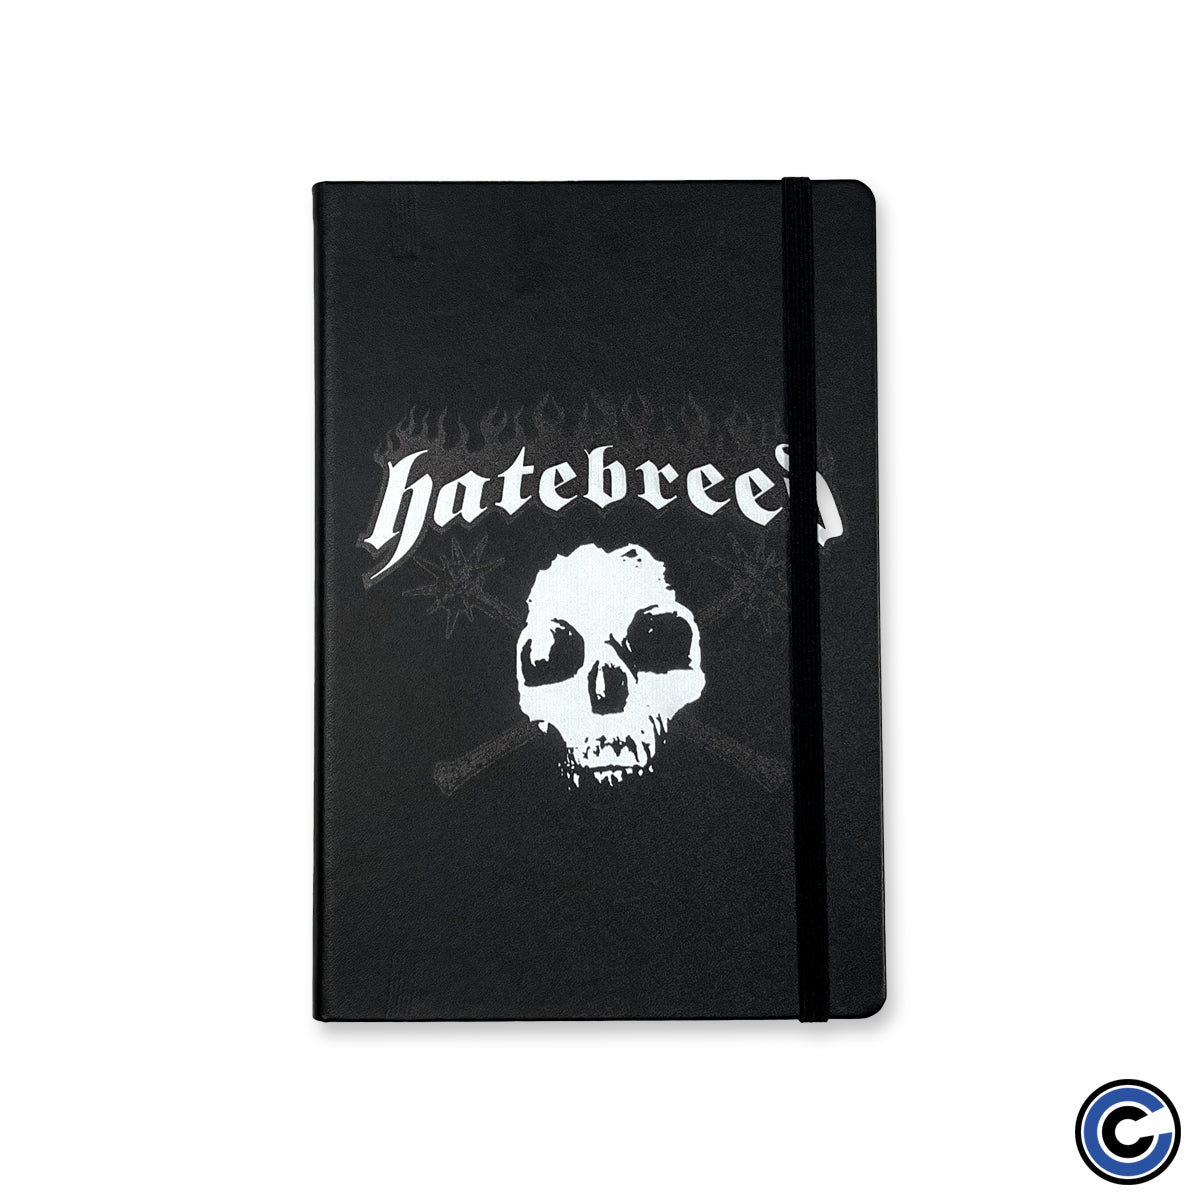 Hatebreed "Confessional" Book